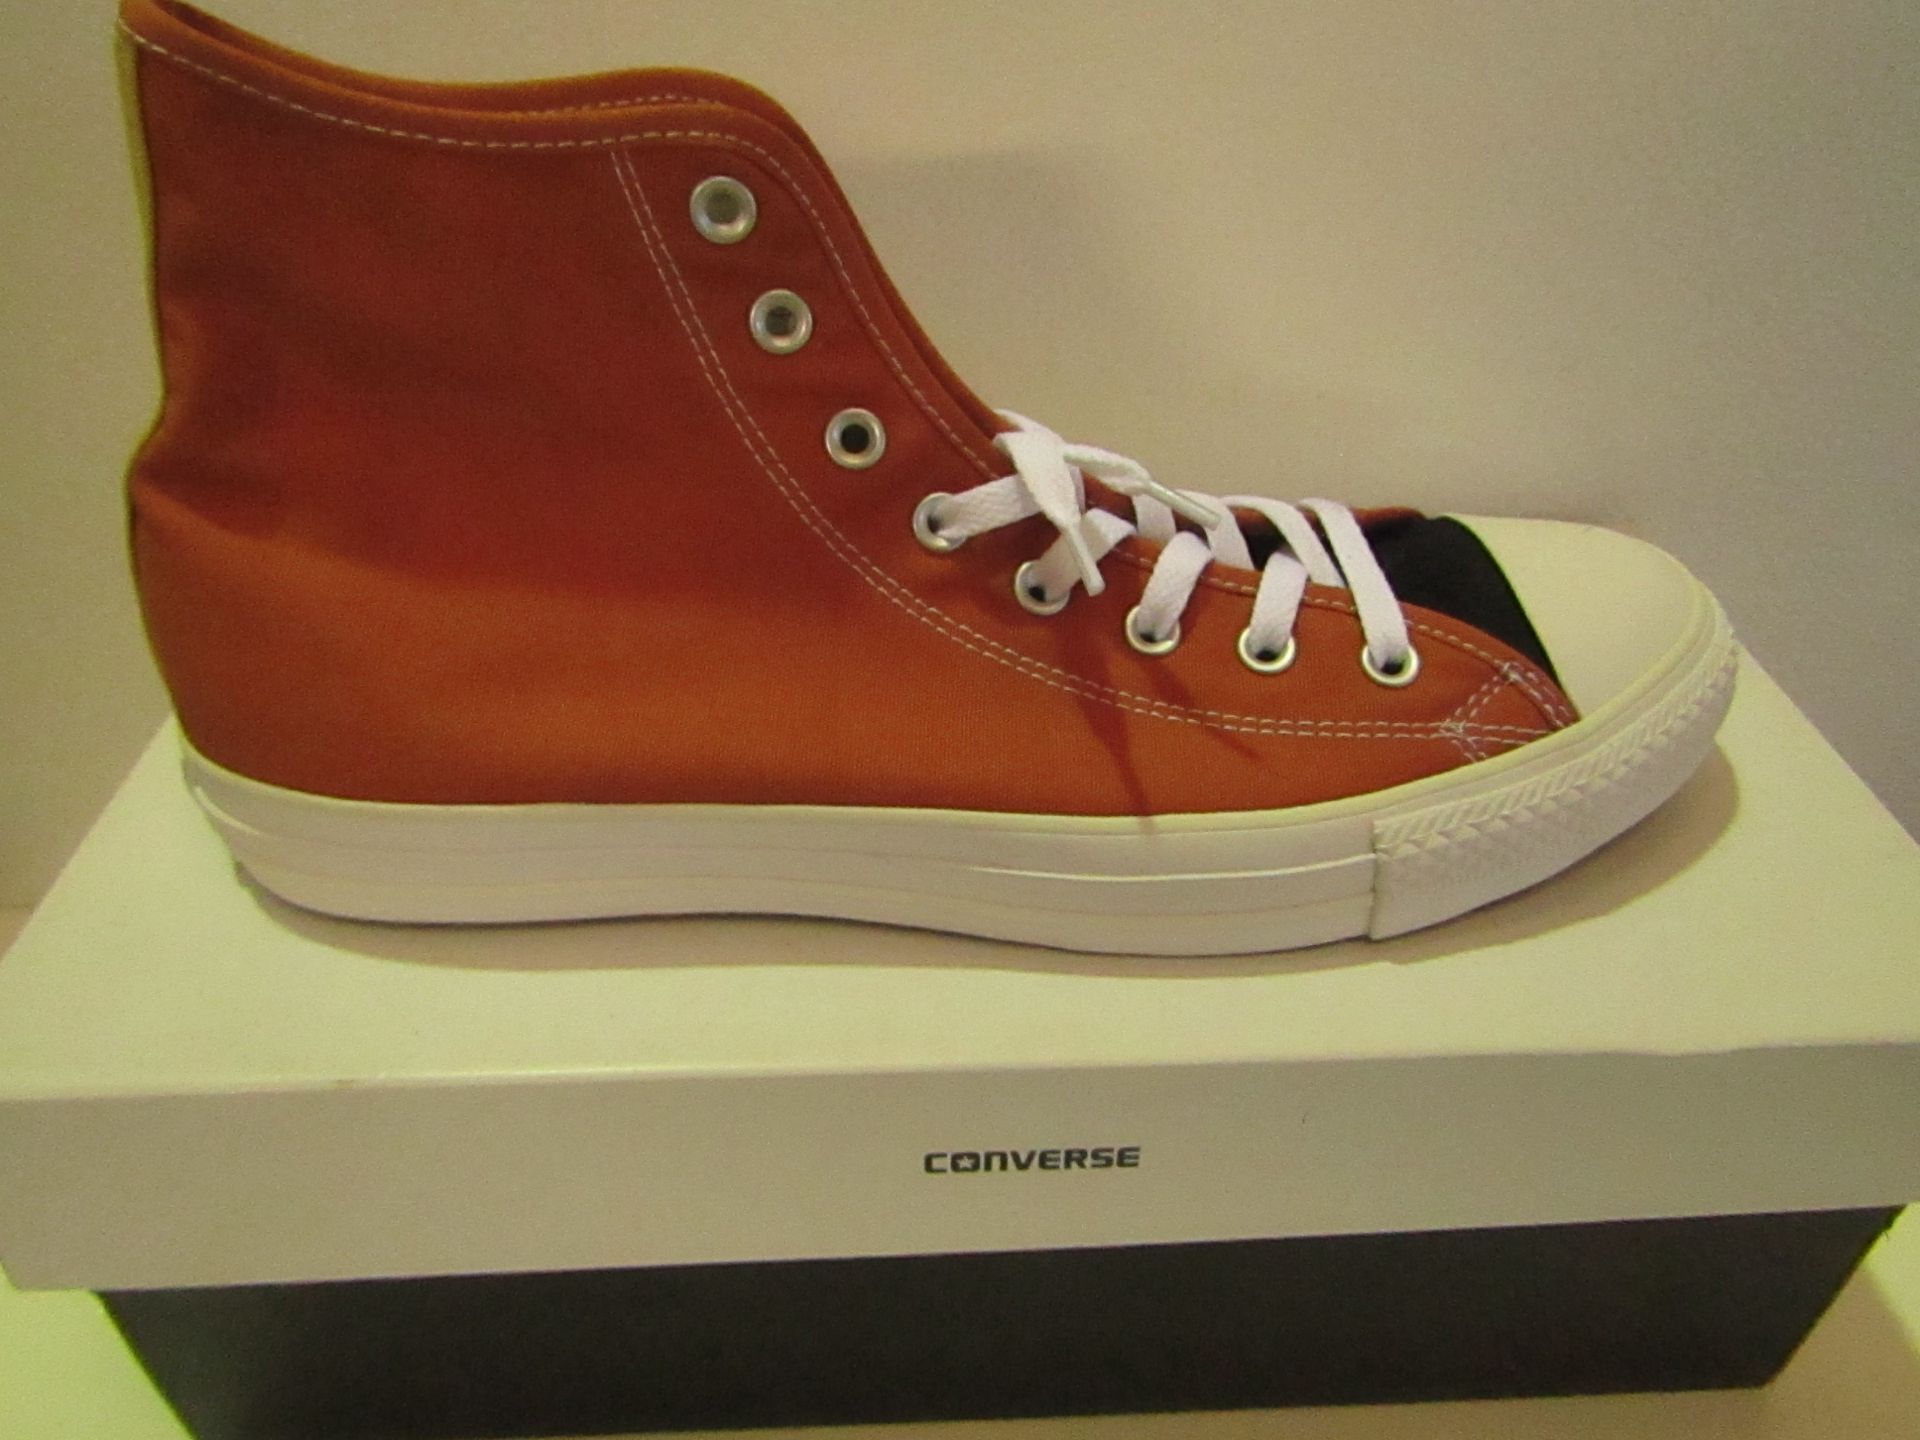 Converse High Top Tan/Yellow/Black Canvas Trainer size UK12 new & boxed see image for design